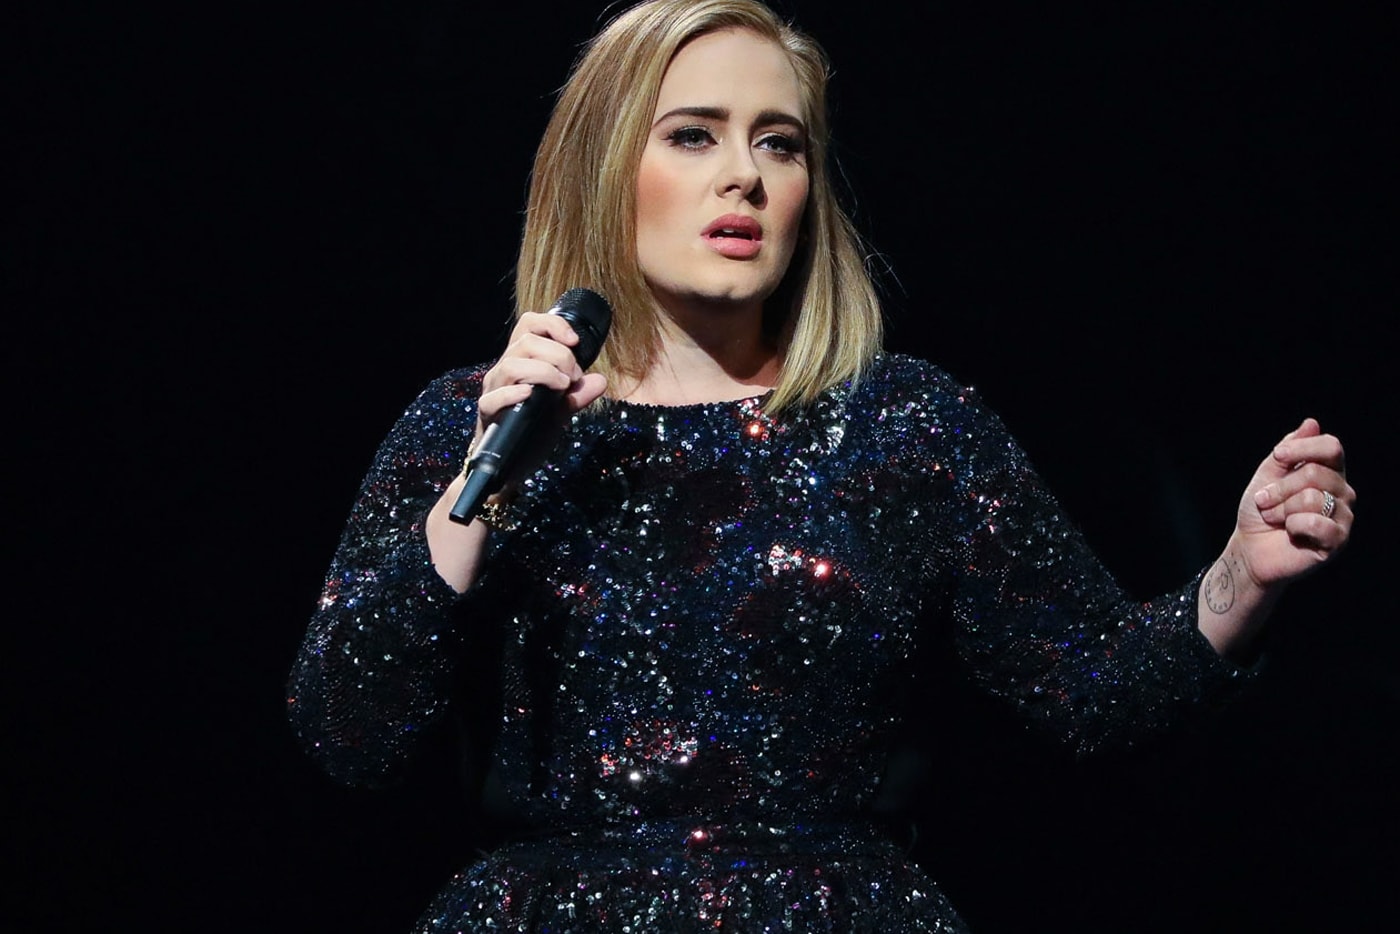 adele-declined-offers-2017-super-bowl-halftime-show